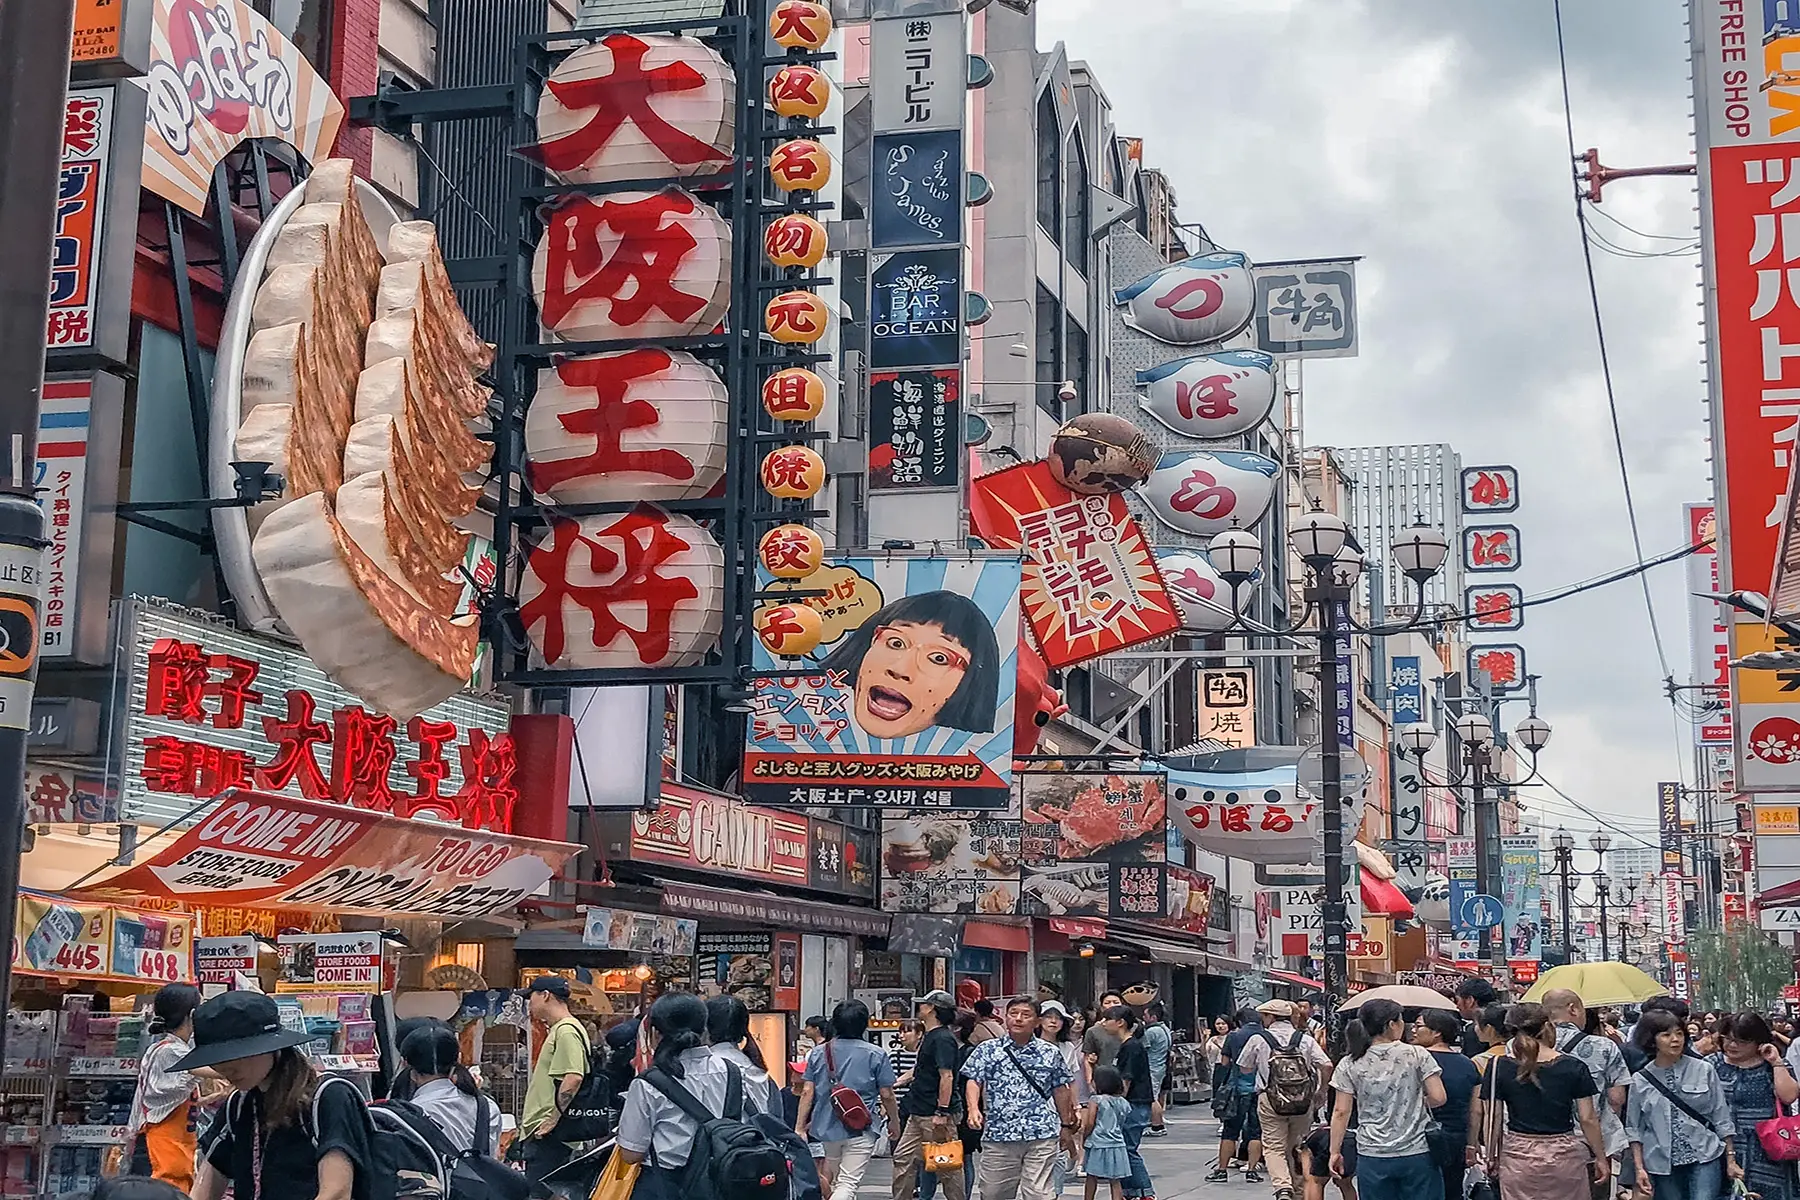 A busy street scene in Japan with many colorful sign boards and people